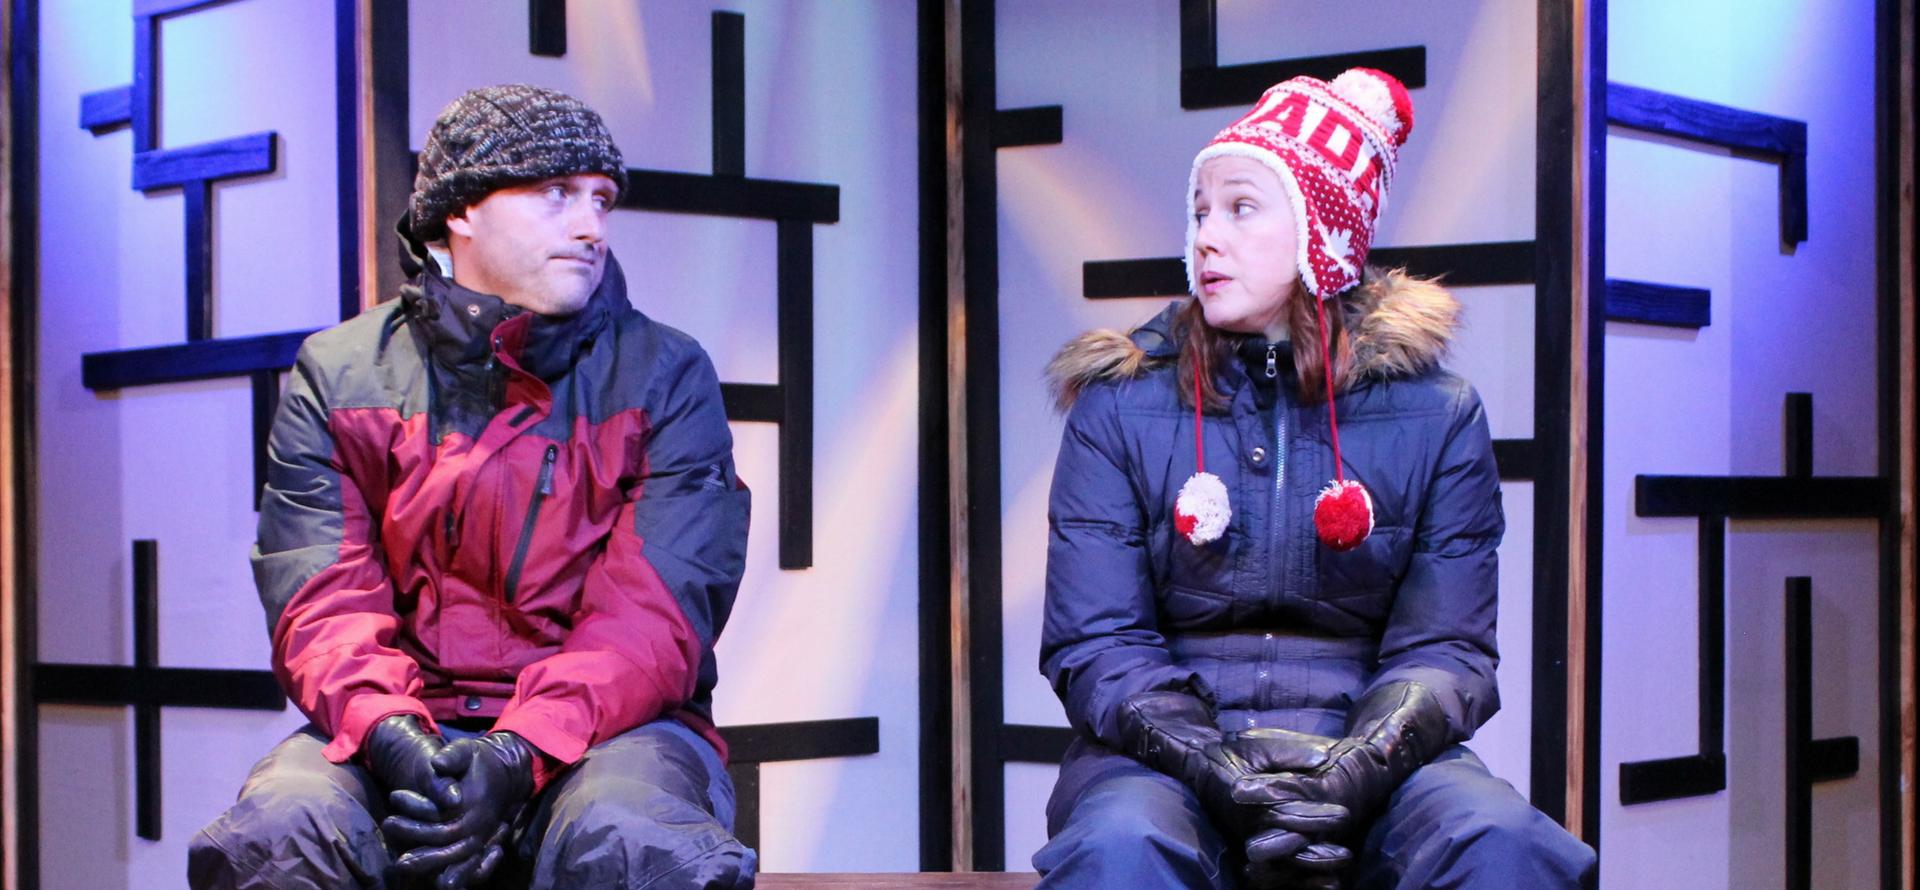 A man and woman on stage in play, sitting on chairs wearing snow gear